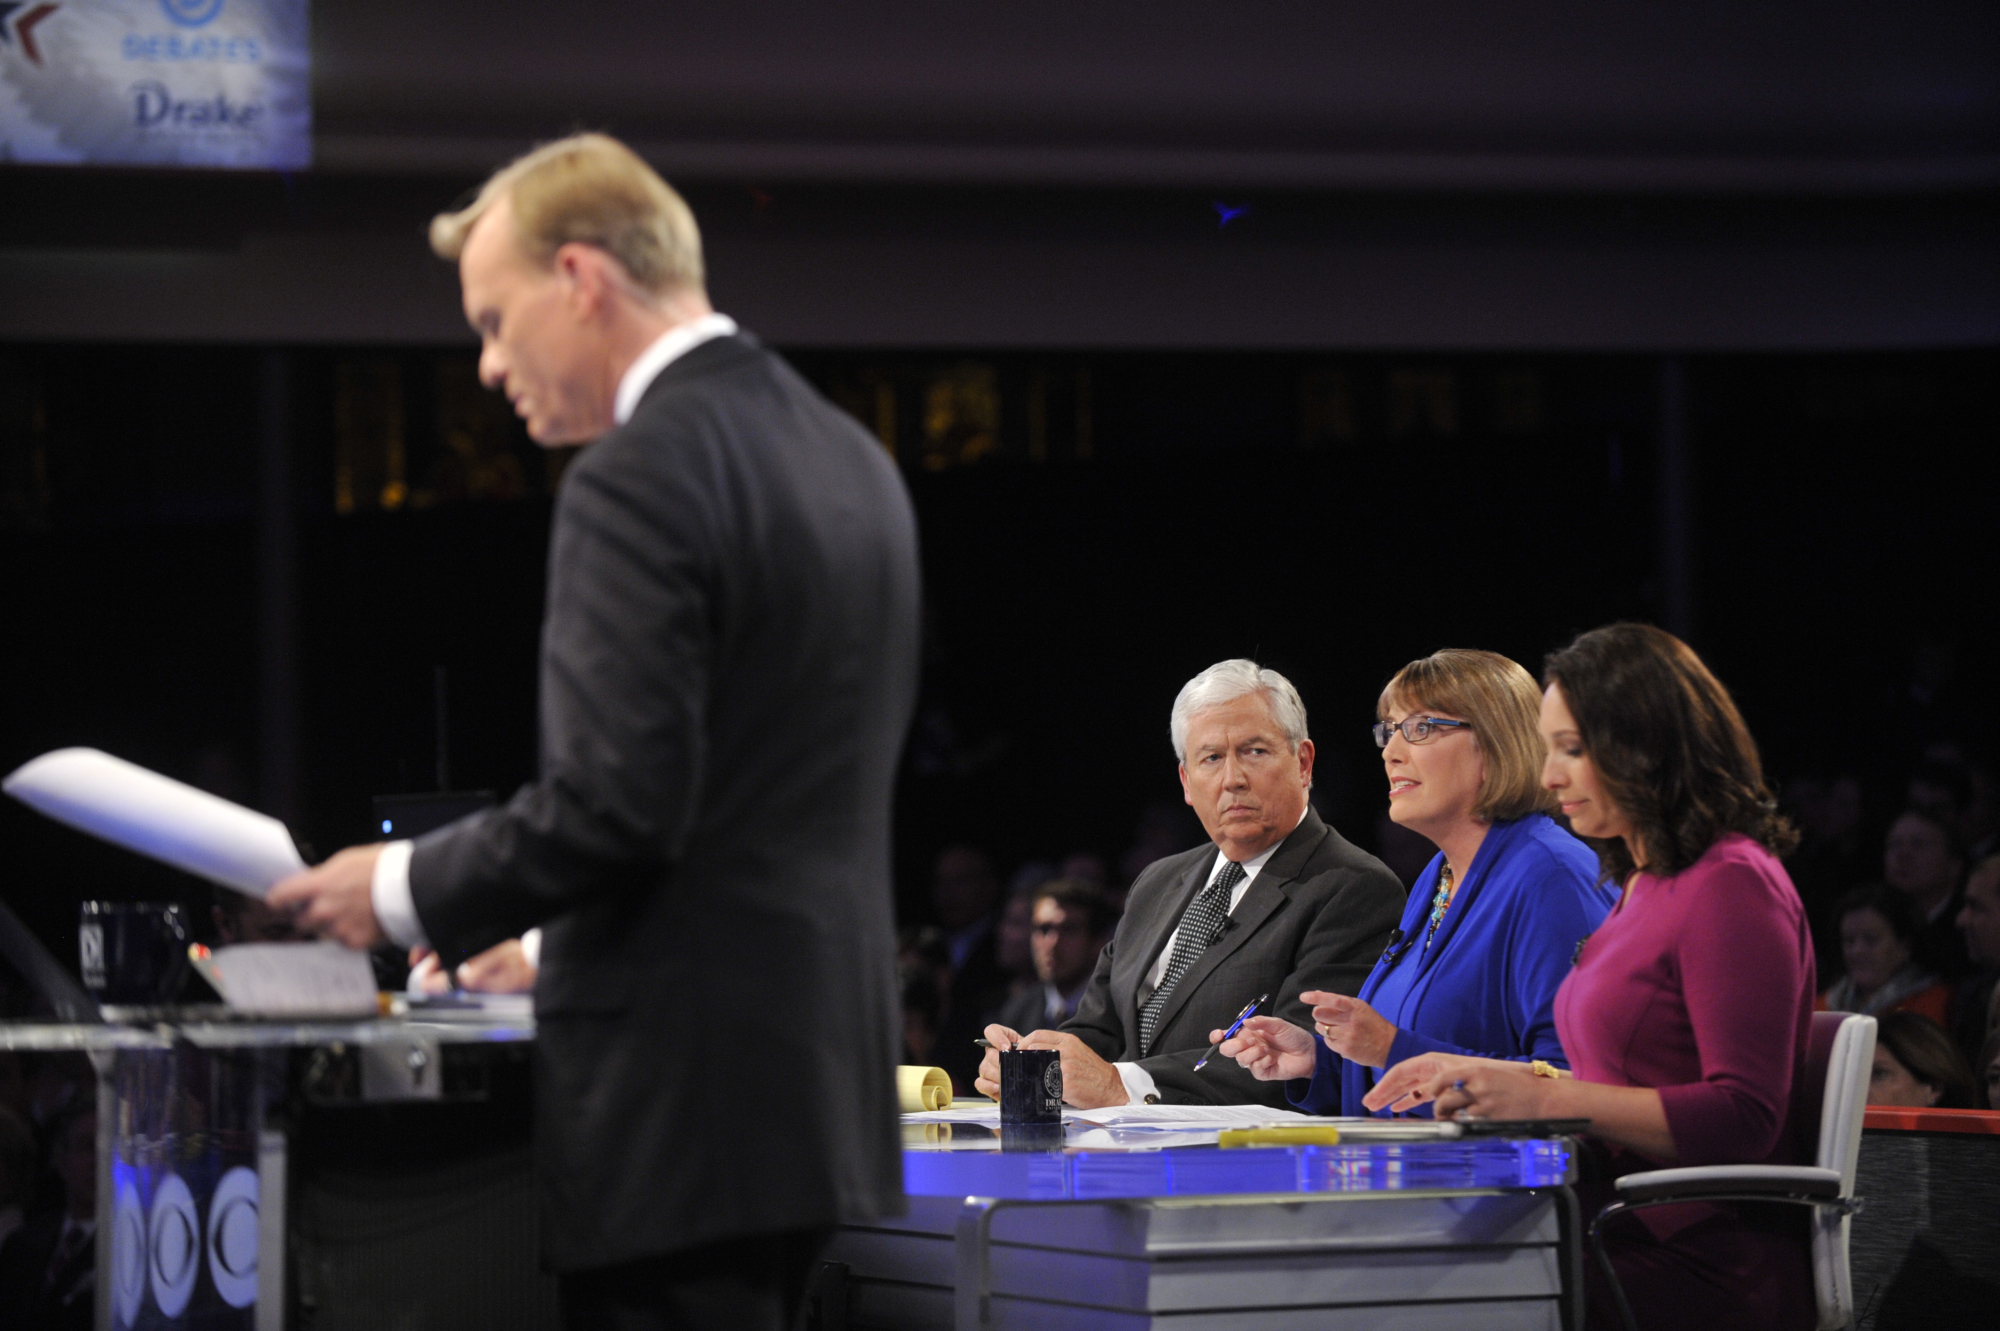 Kevin Cooney, ’74, and Kathie Obradovich, ’87, moderating at a Democratic Debate in Des Moines